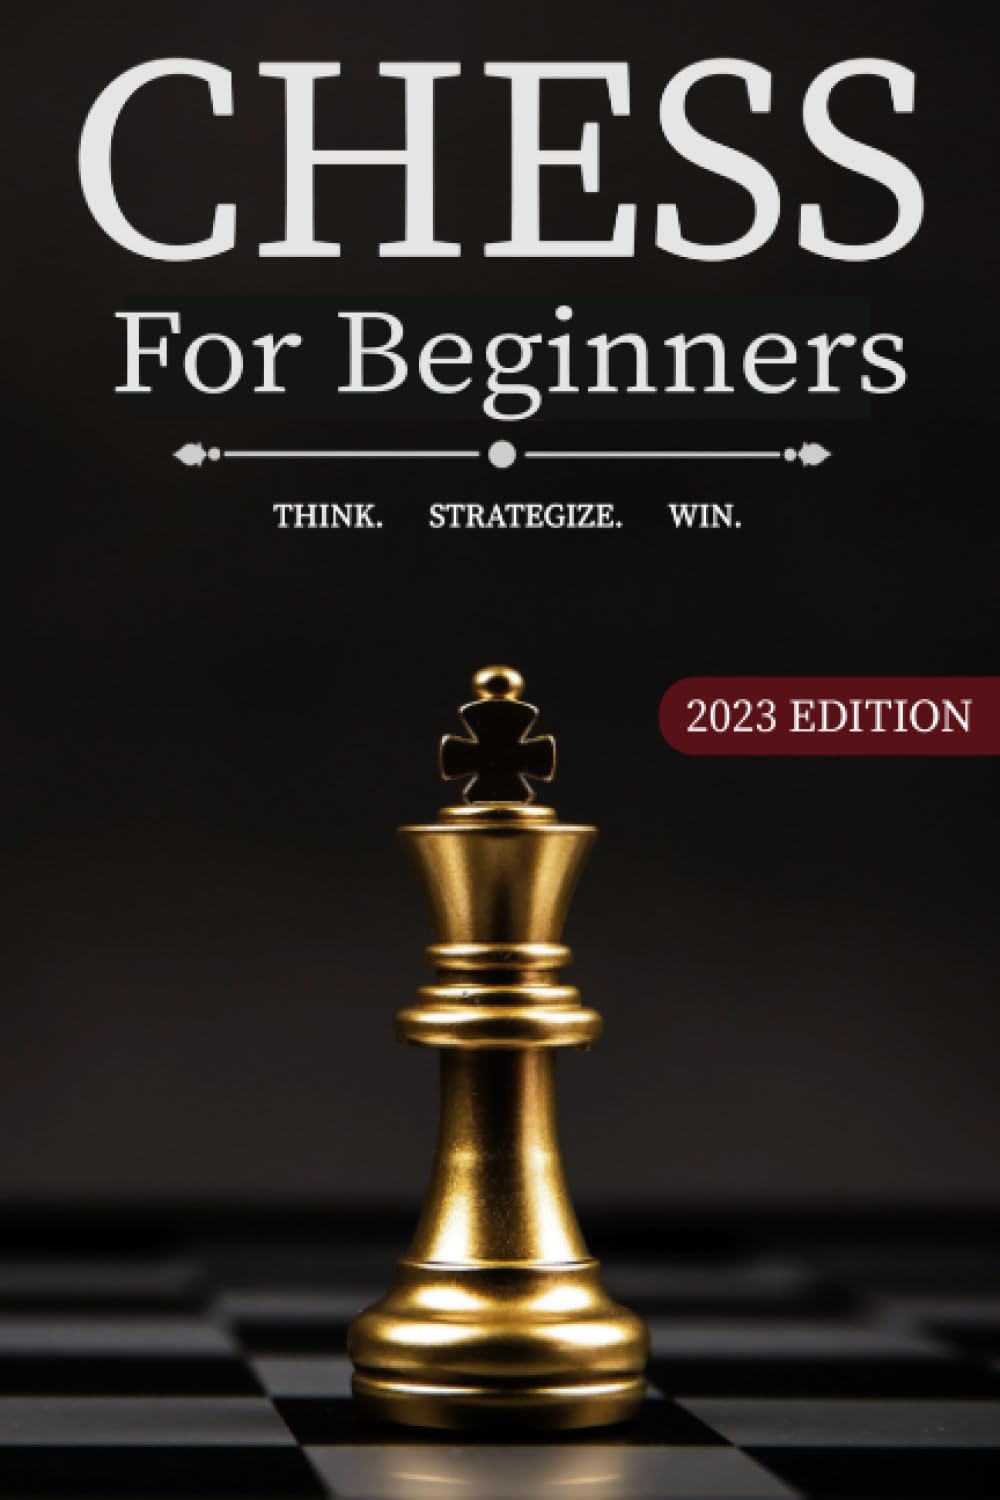 Chess for Beginners: The Ultimate Chess Strategy Guide with Simple Step by Step Instructions to Understand and Master Rules